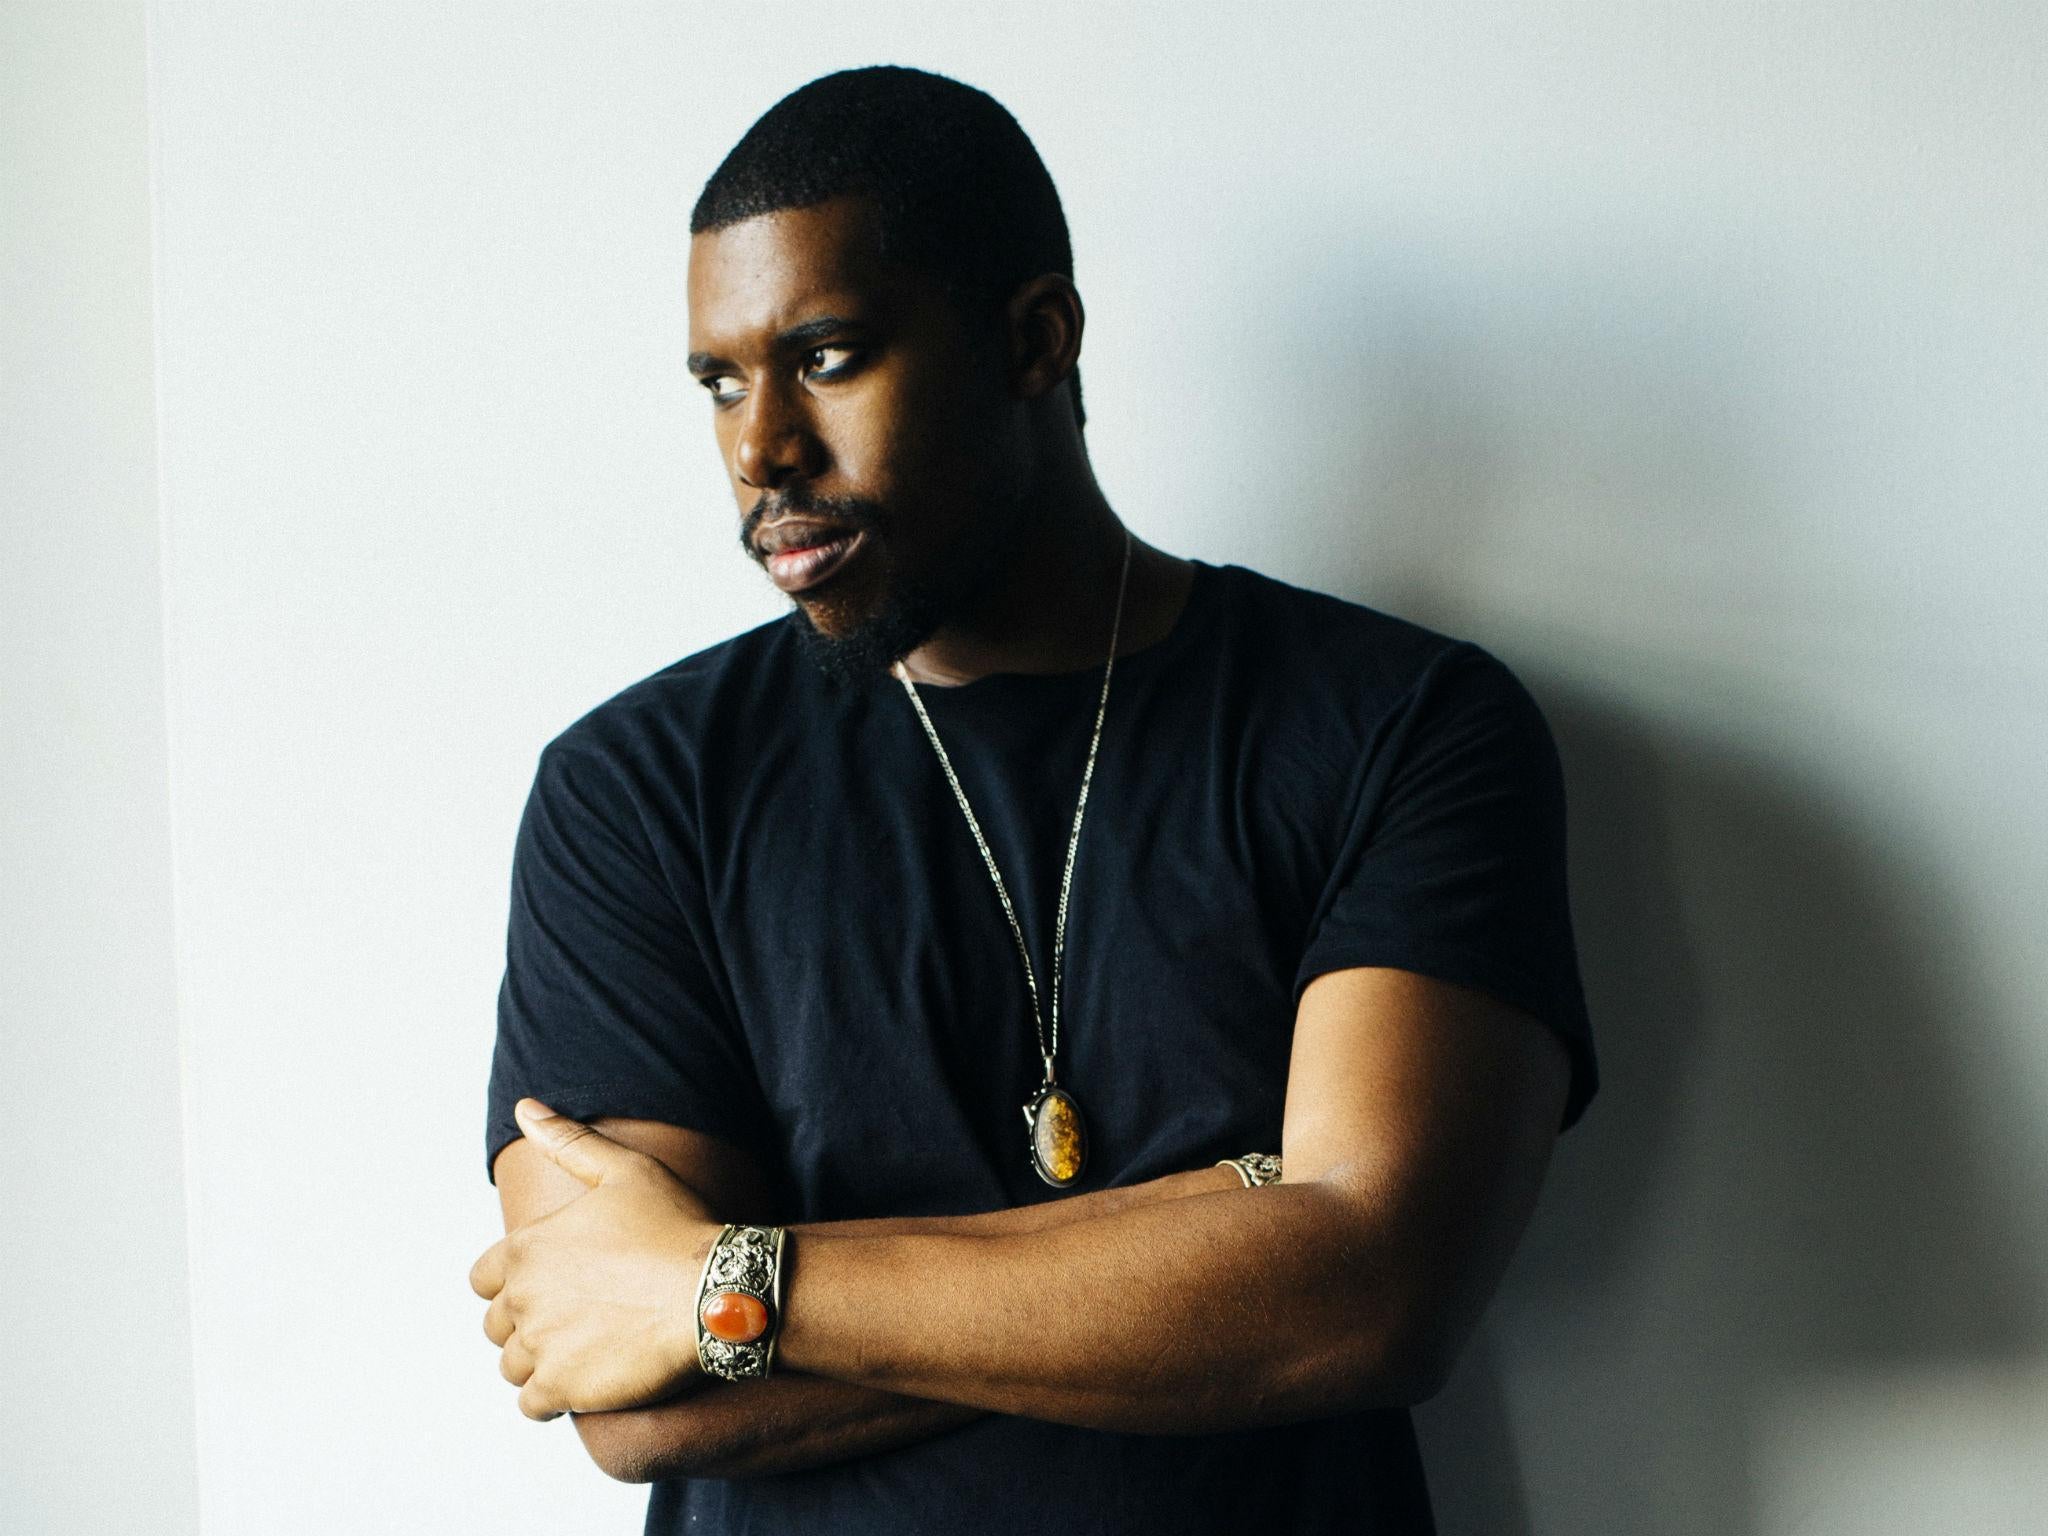 With ‘Kuso’, Steven Ellison (aka Flying Lotus) has fulfilled his dream of making a film